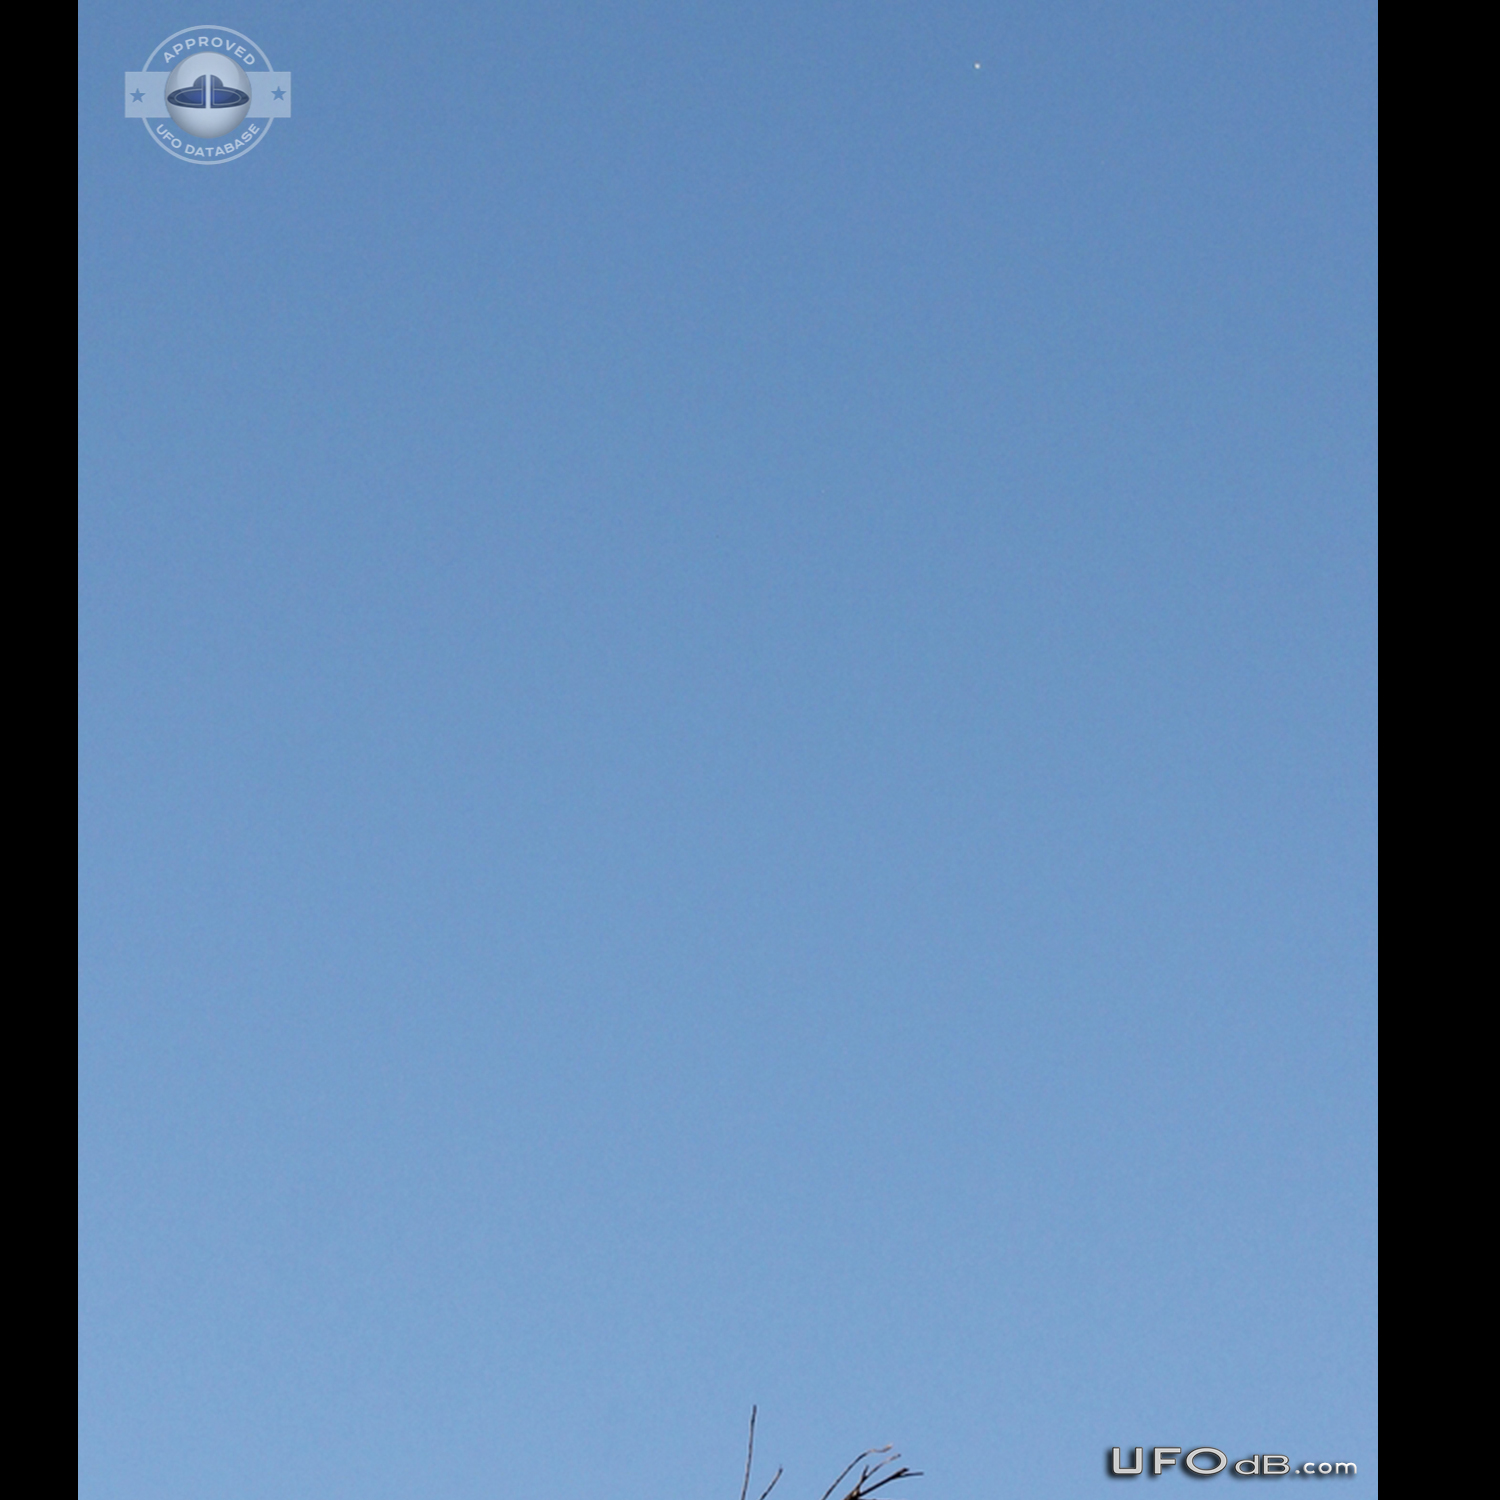 UFO moving fast at high altitude in Avaré, São Paulo, Brazil Jan 2015 UFO Picture #611-1